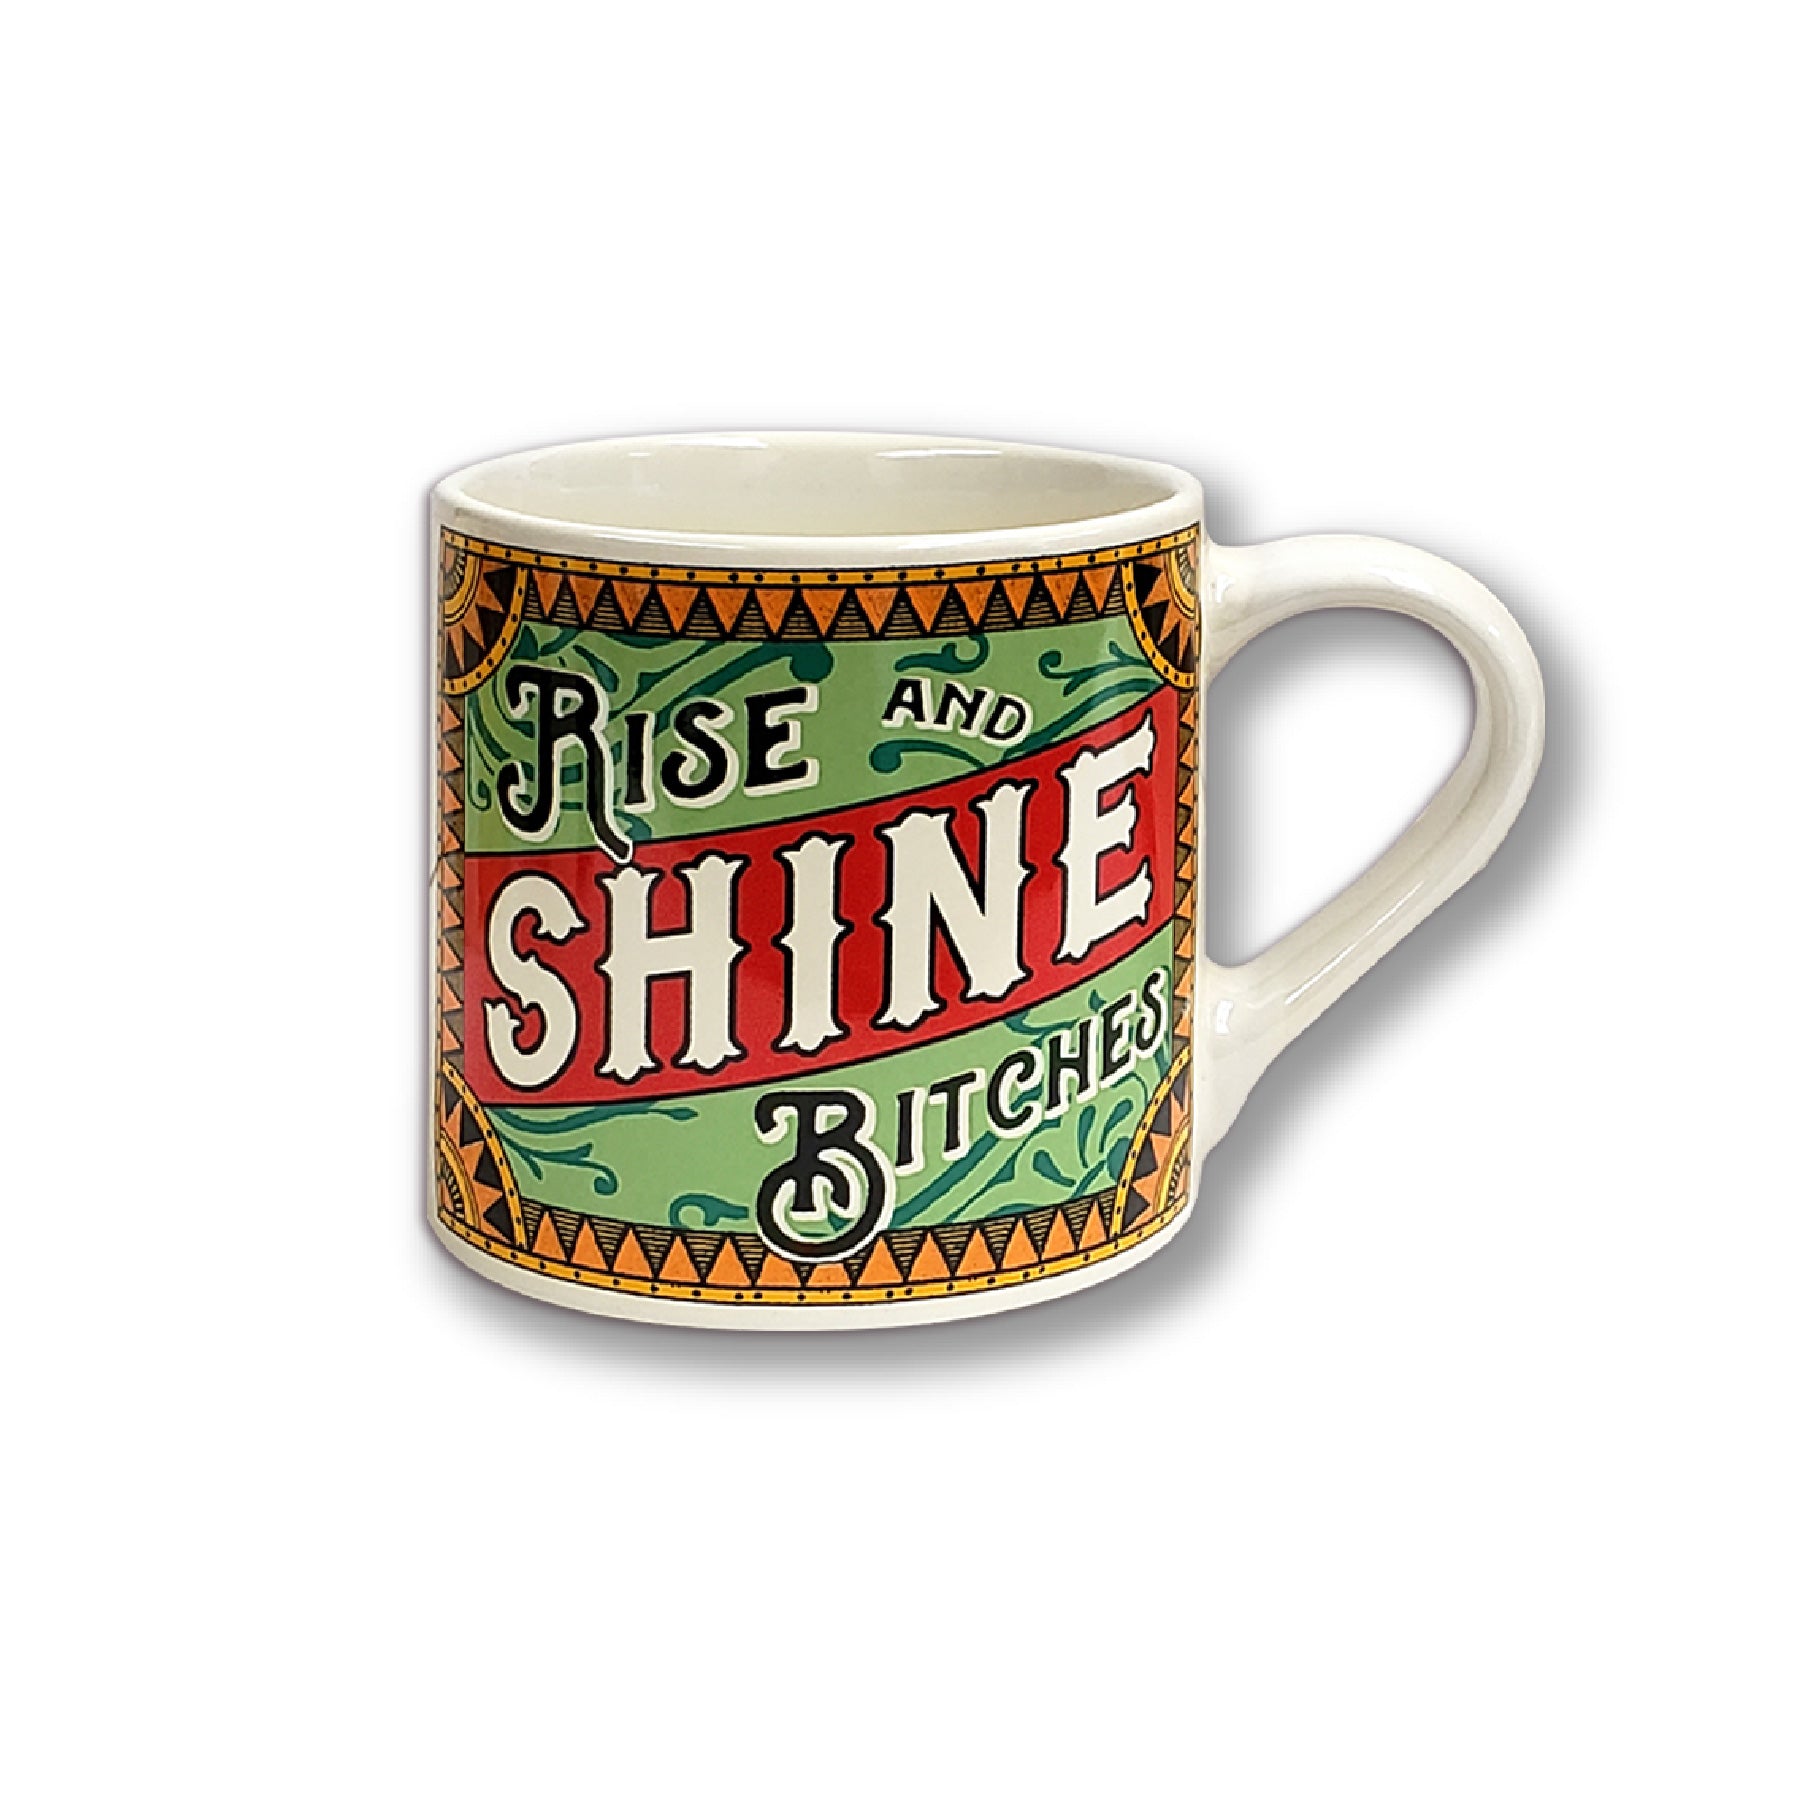 ceramic tea or coffee mug. cafe cup reads "Rise and Shine Bitches" in white, red, green, orange and black retro vintage style